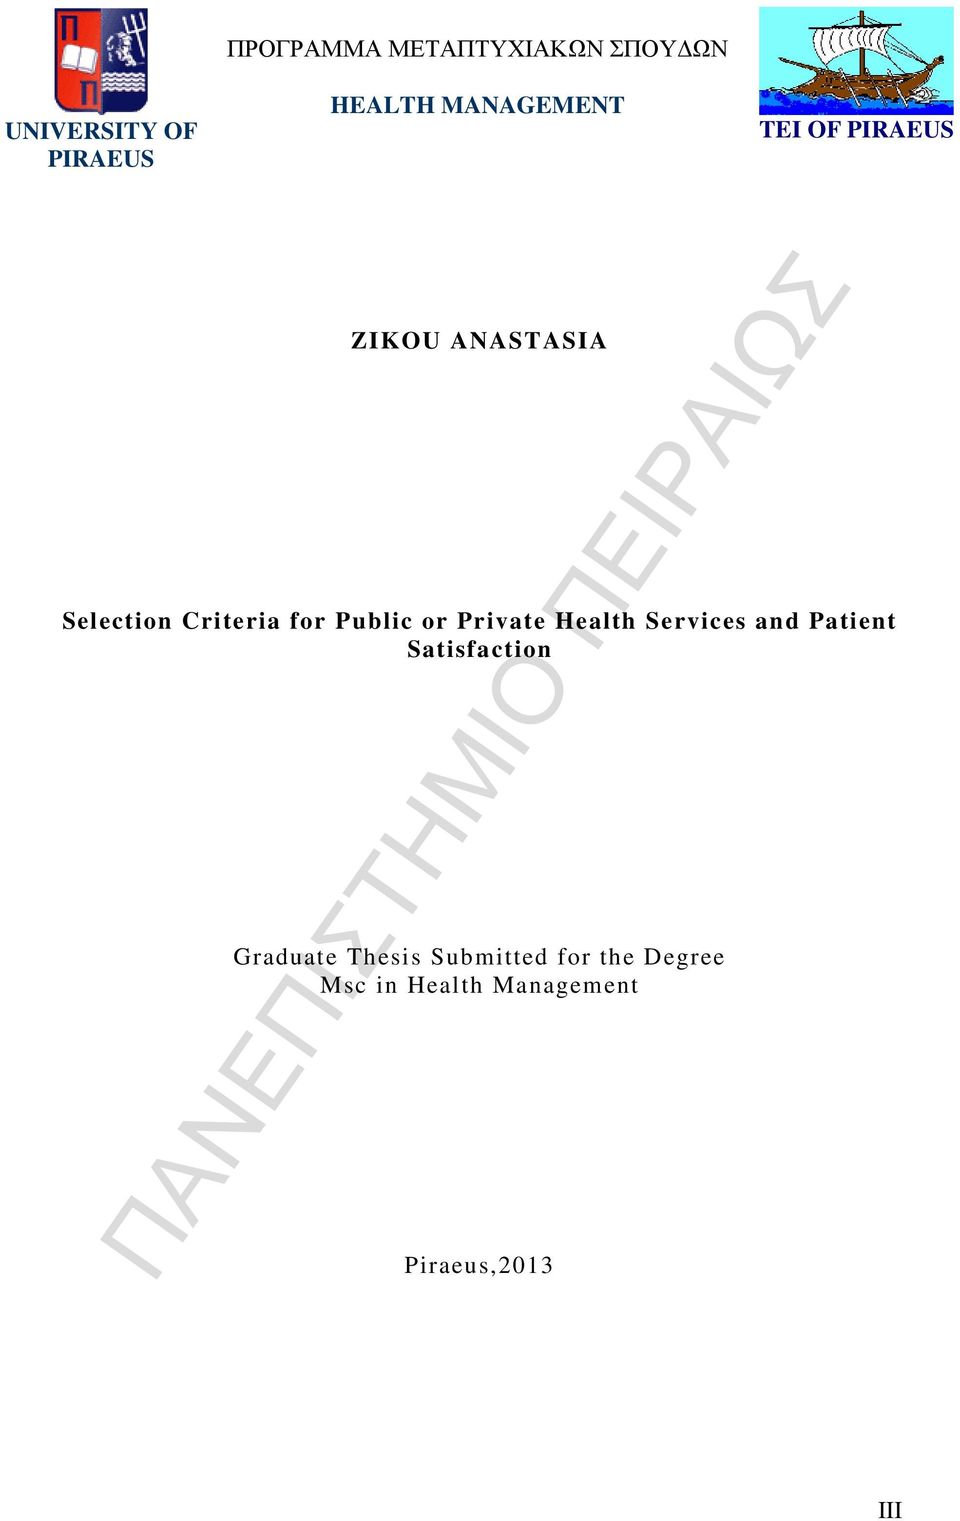 Public or Private Health Services and Patient Satisfaction